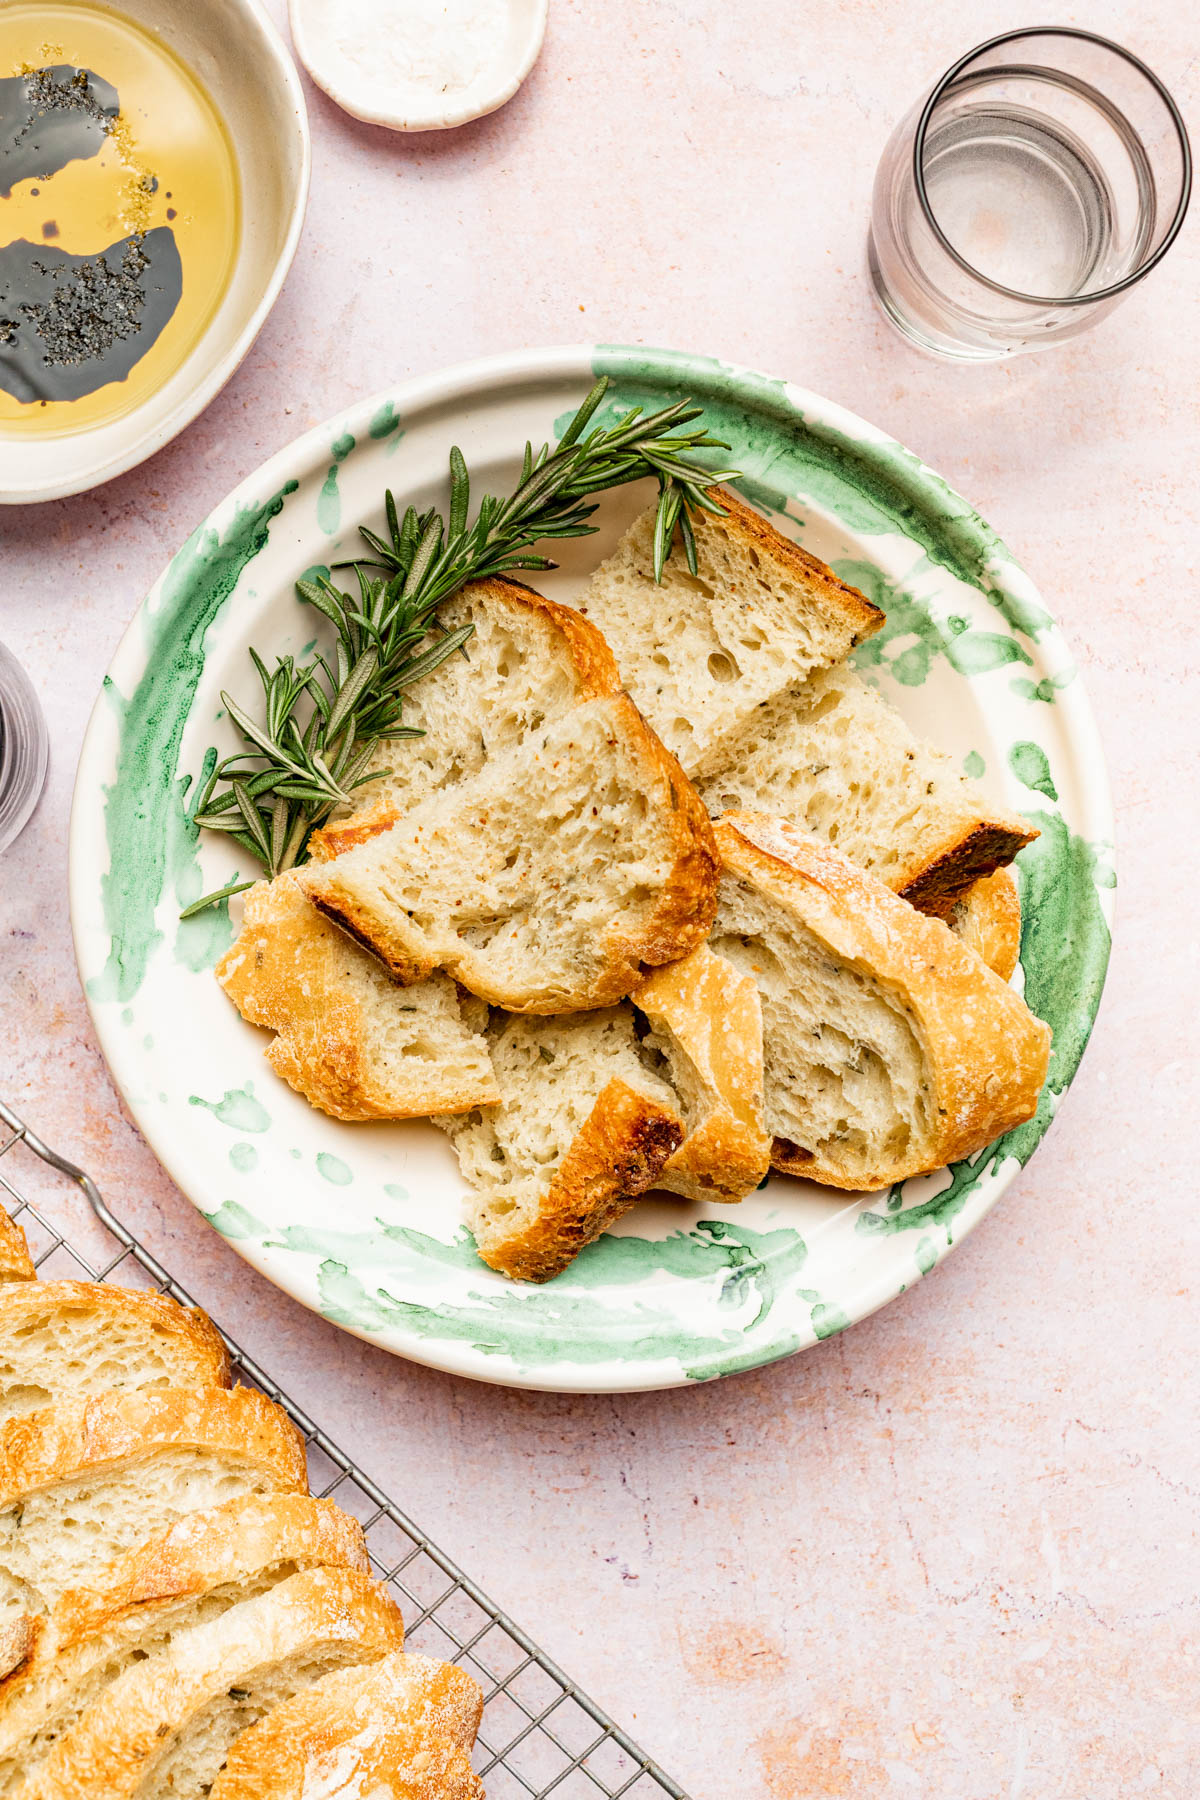 Halved slices of bread in a bowl with rosemary.